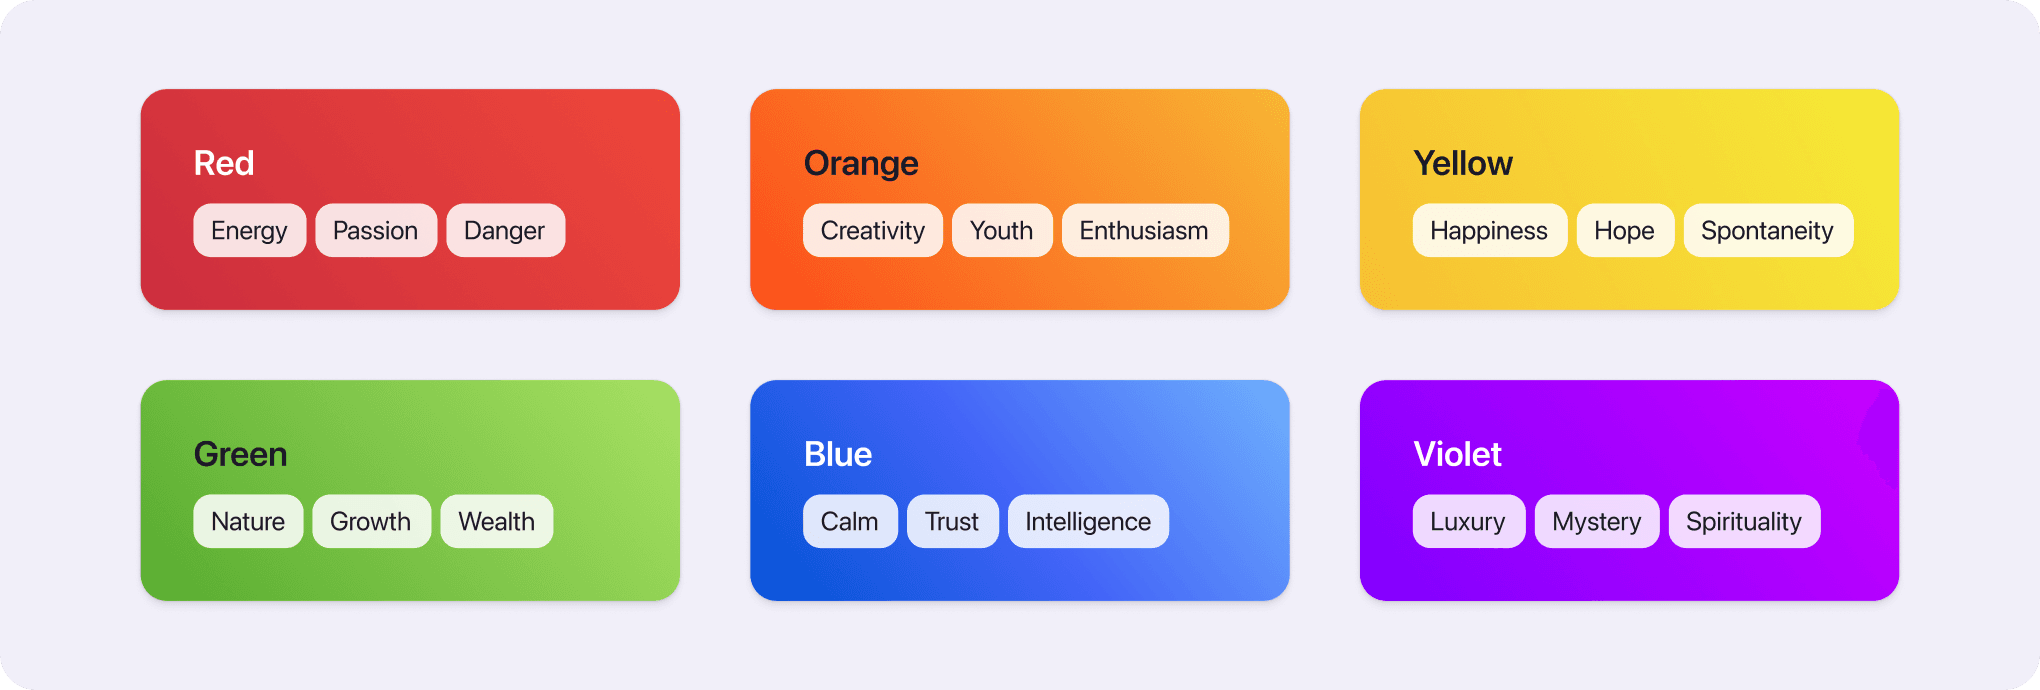 Main color families and their meanings